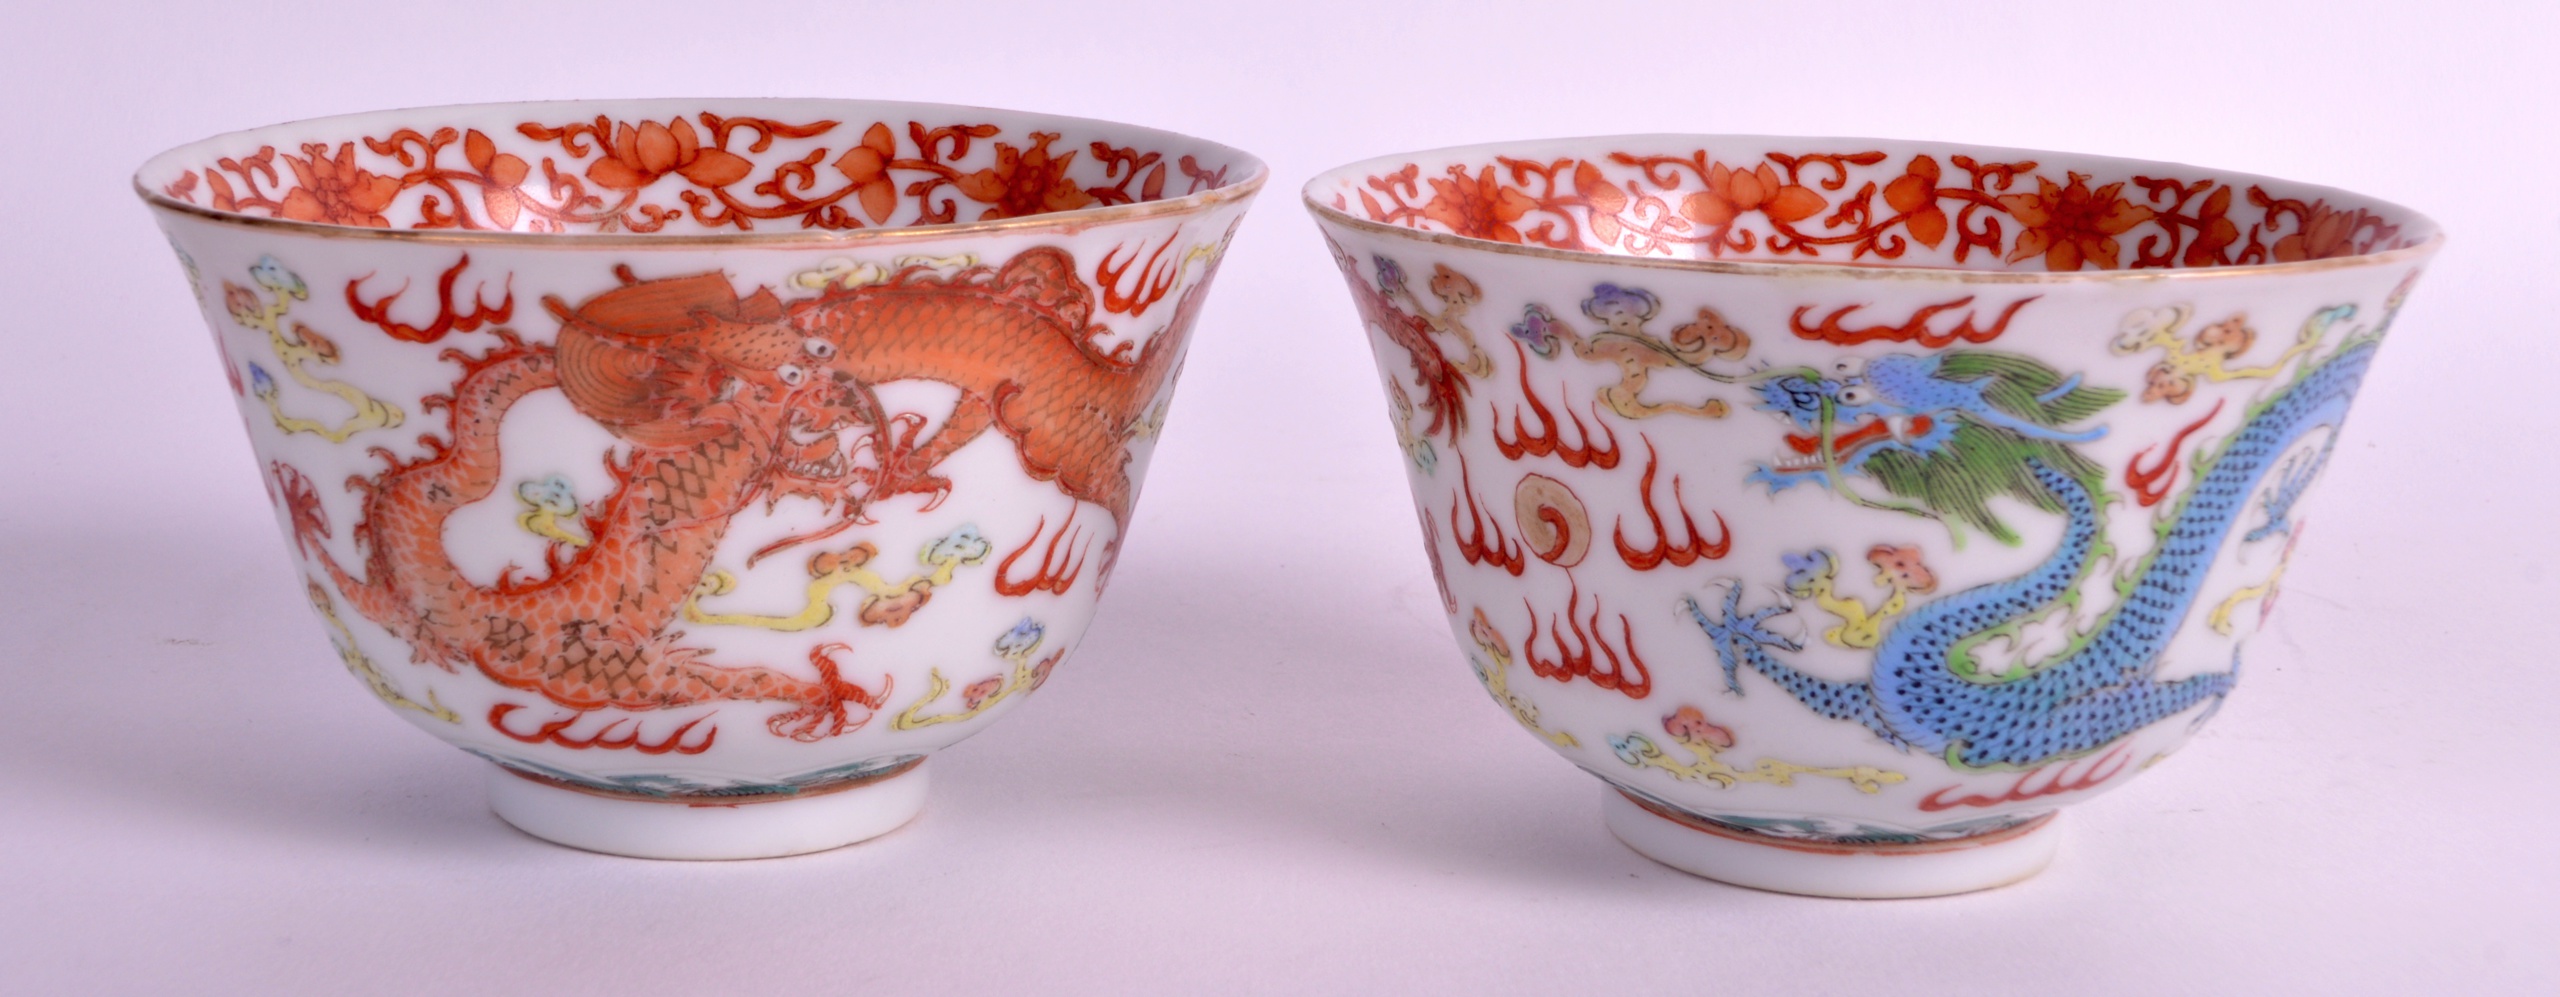 A PAIR OF EARLY 20TH CENTURY CHINESE FAMILLE ROSE BOWLS painted with dragons amongst clouds. 4Ins